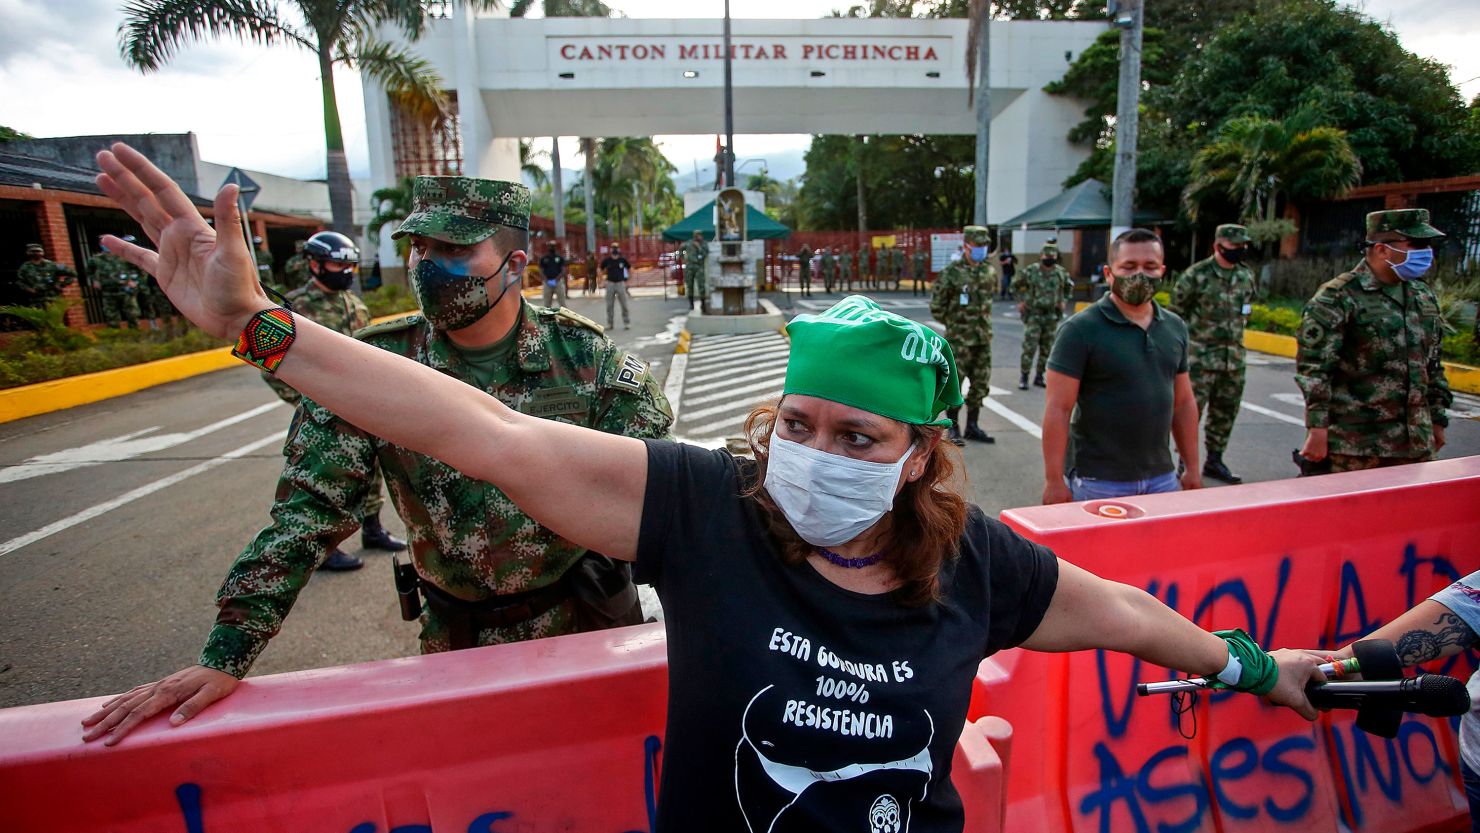 A woman wears a face mask as she takes part in a protest on July 3 outside an army barracks over the alleged rape of indigenous girls by members of the Colombian army.